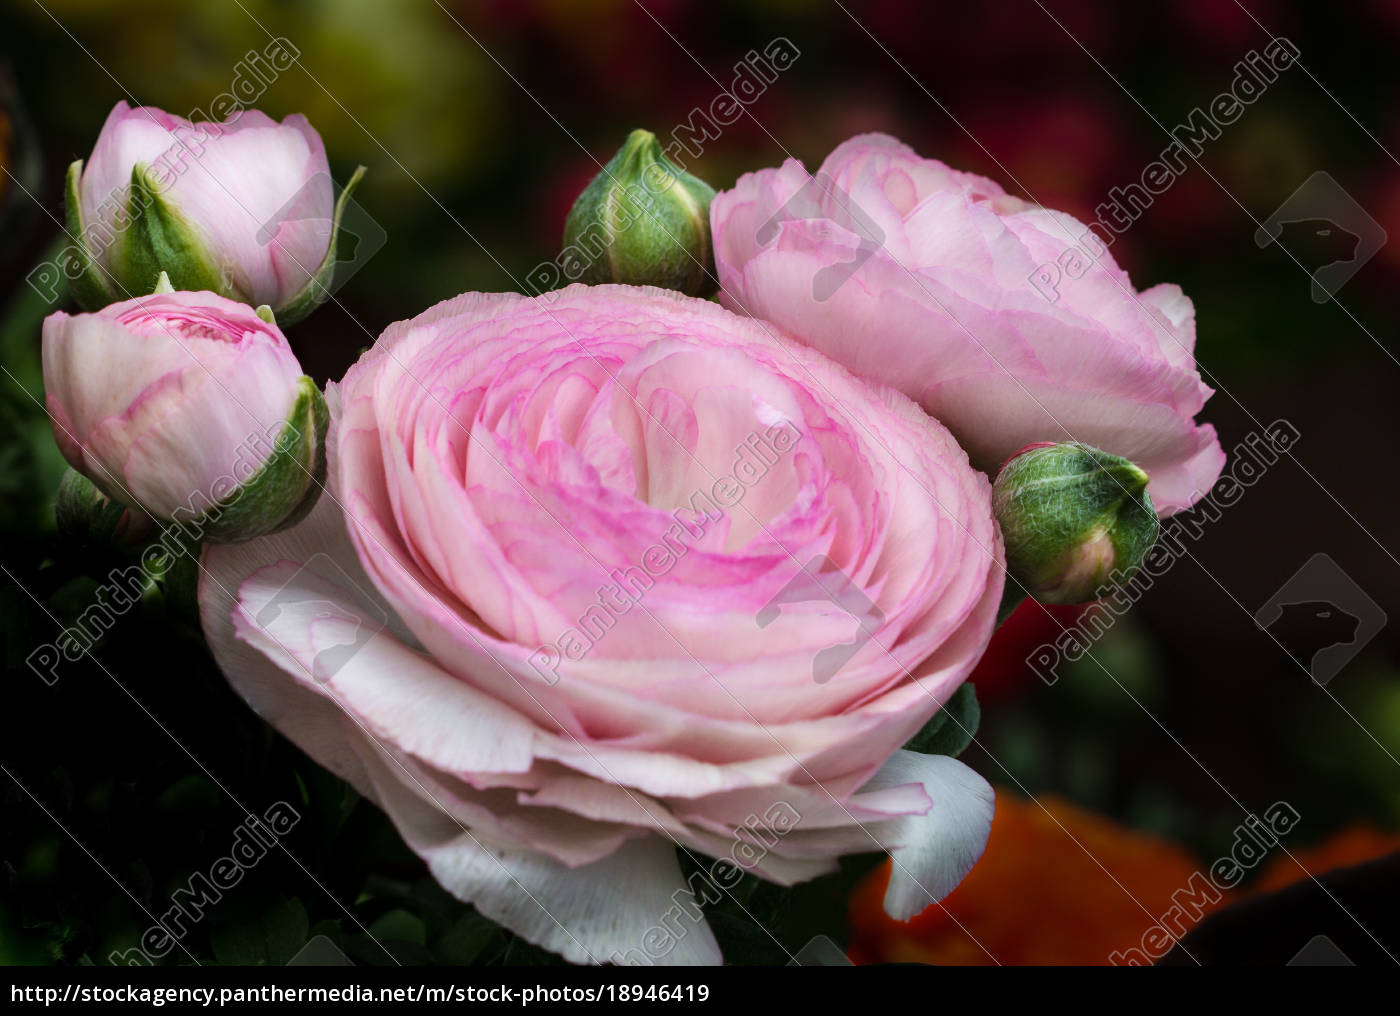 Ranunculus Flowers And Buds Royalty Free Image 18946419 Panthermedia Stock Agency